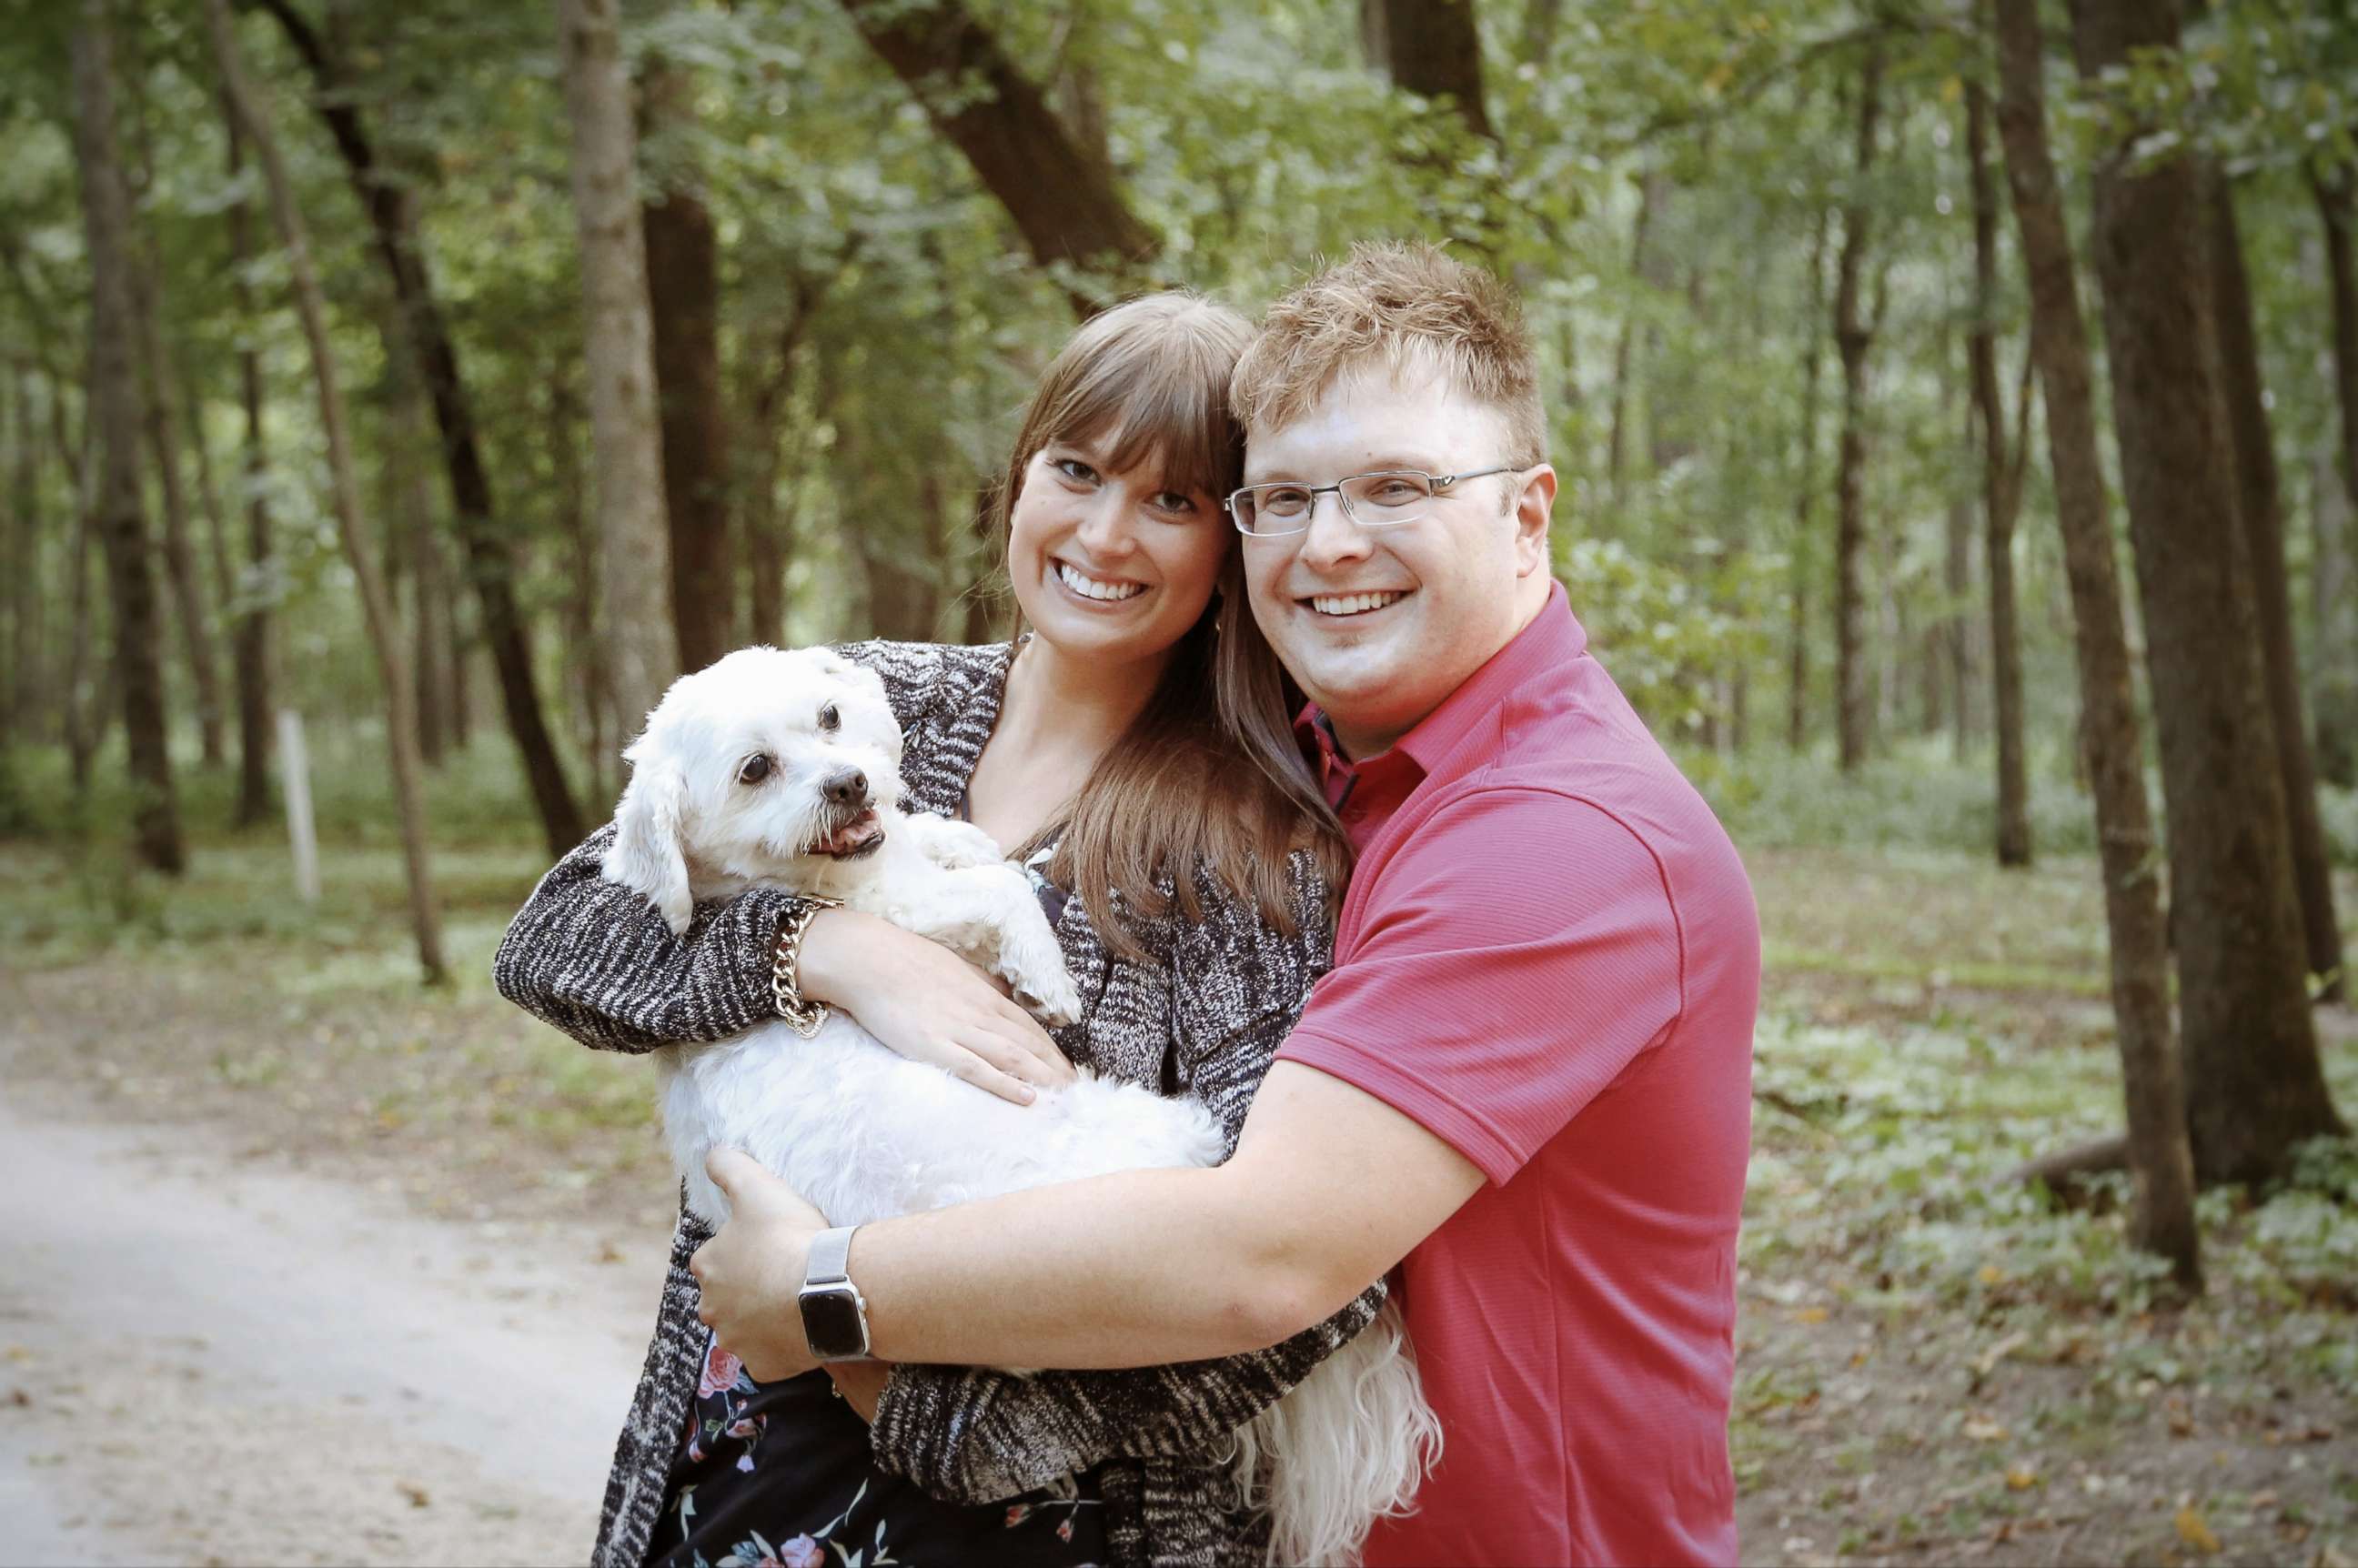 PHOTO: Jared and Chelsea Price decided to have a "newborn" photo shoot with their beloved dog, Riley.